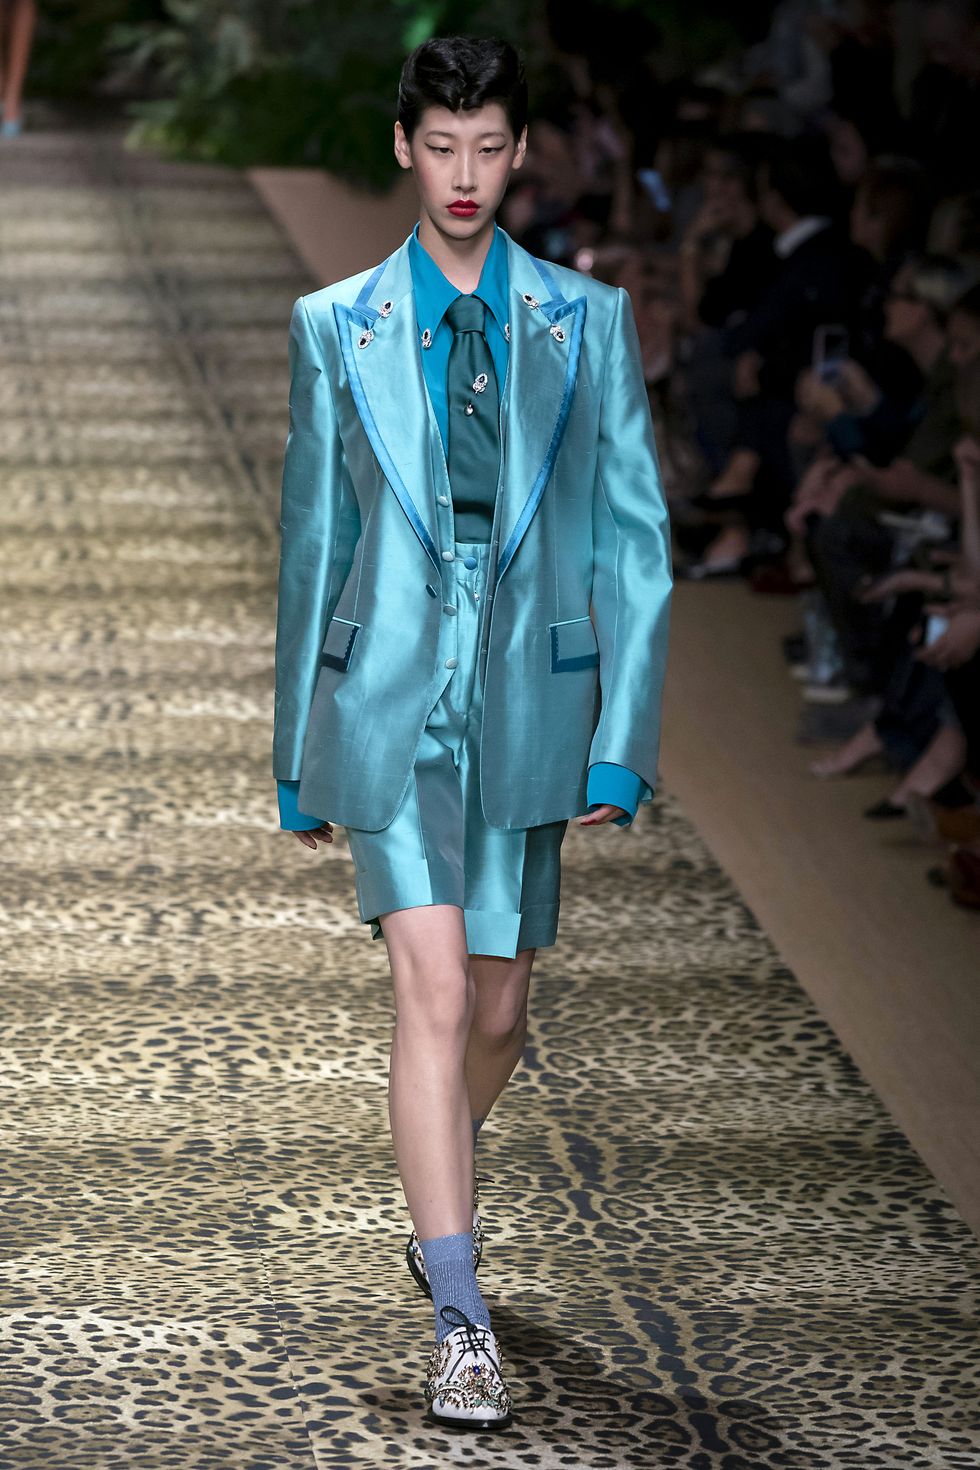 Fashion model, Fashion show, Fashion, Runway, Clothing, Blue, Electric blue, Turquoise, Haute couture, Spring, 